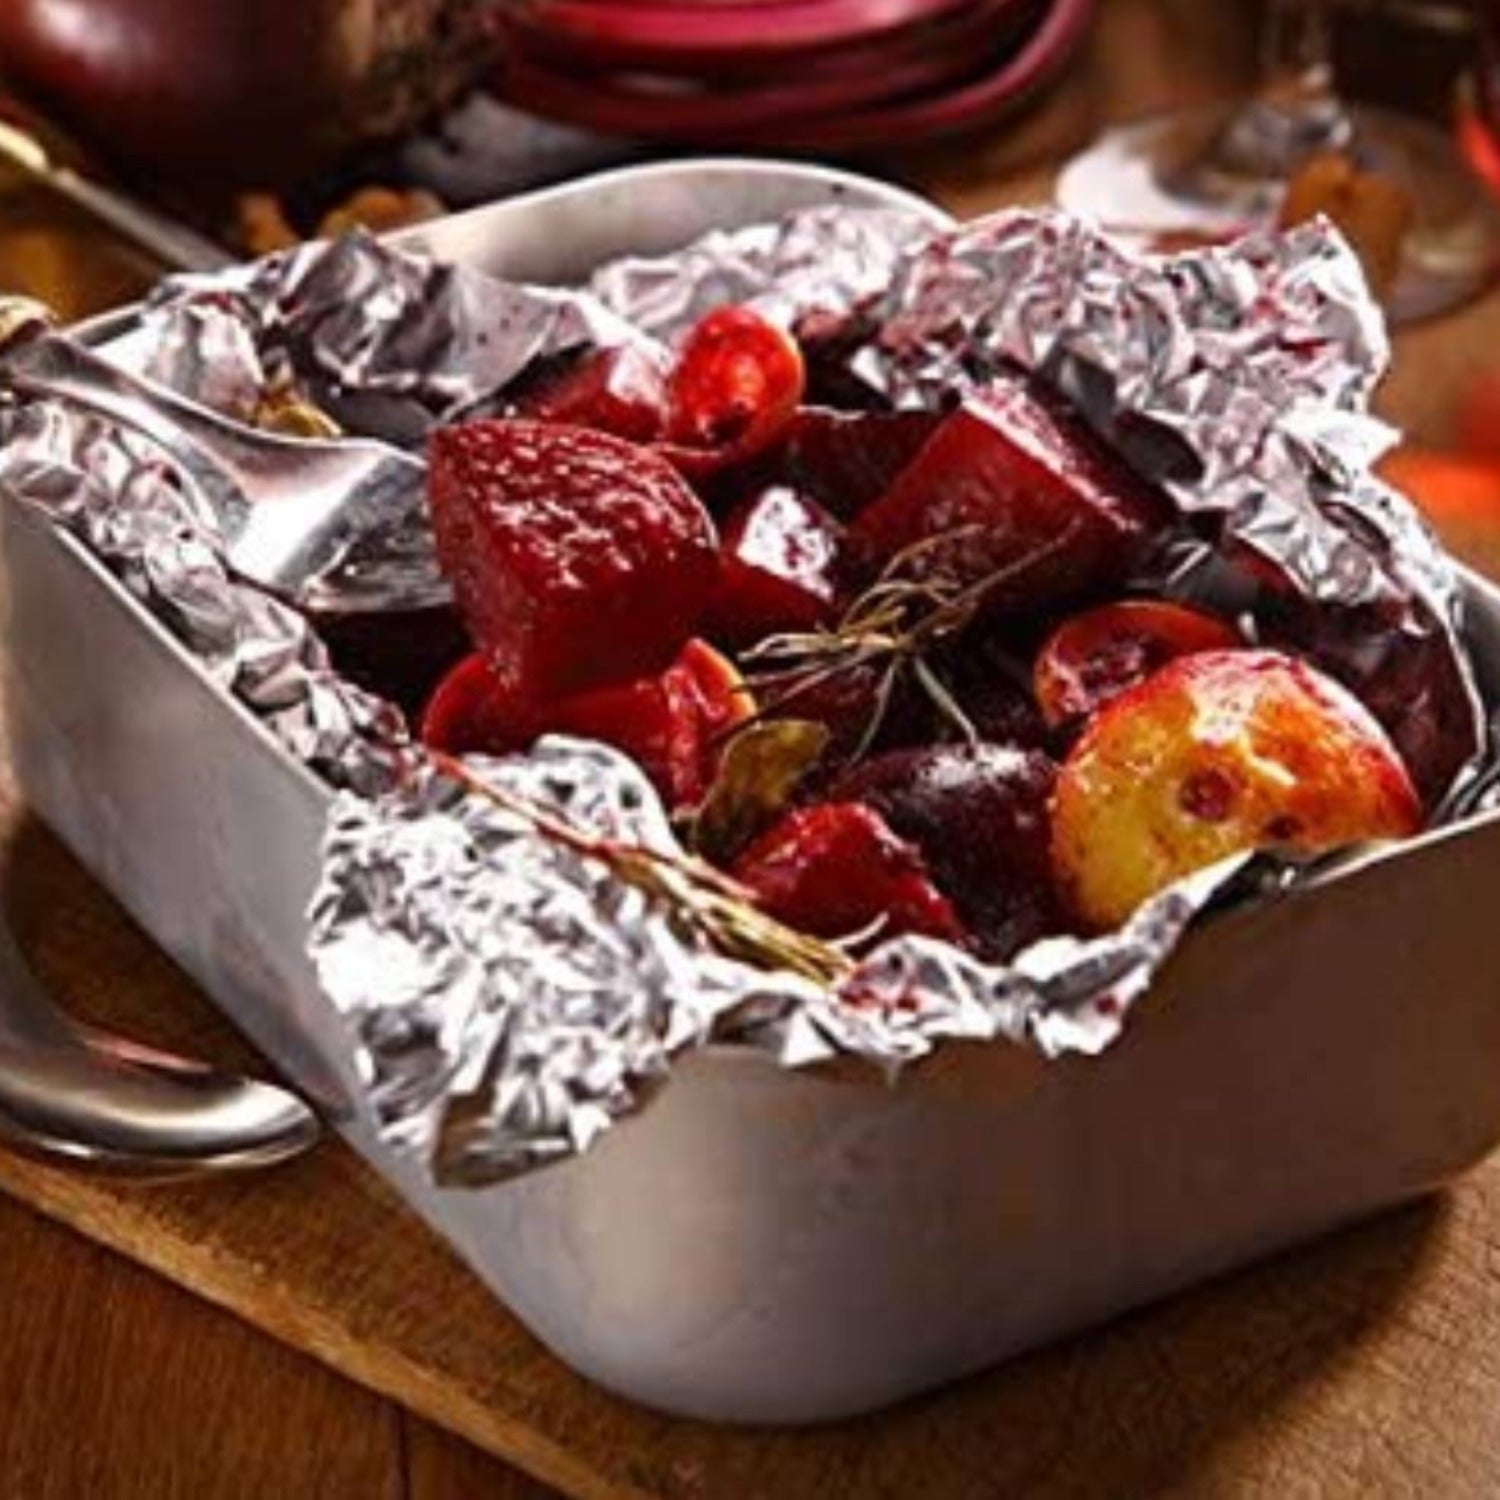 Nicole Home Collection 00545 Aluminum Oblong Pan 5 lb Pack of 250